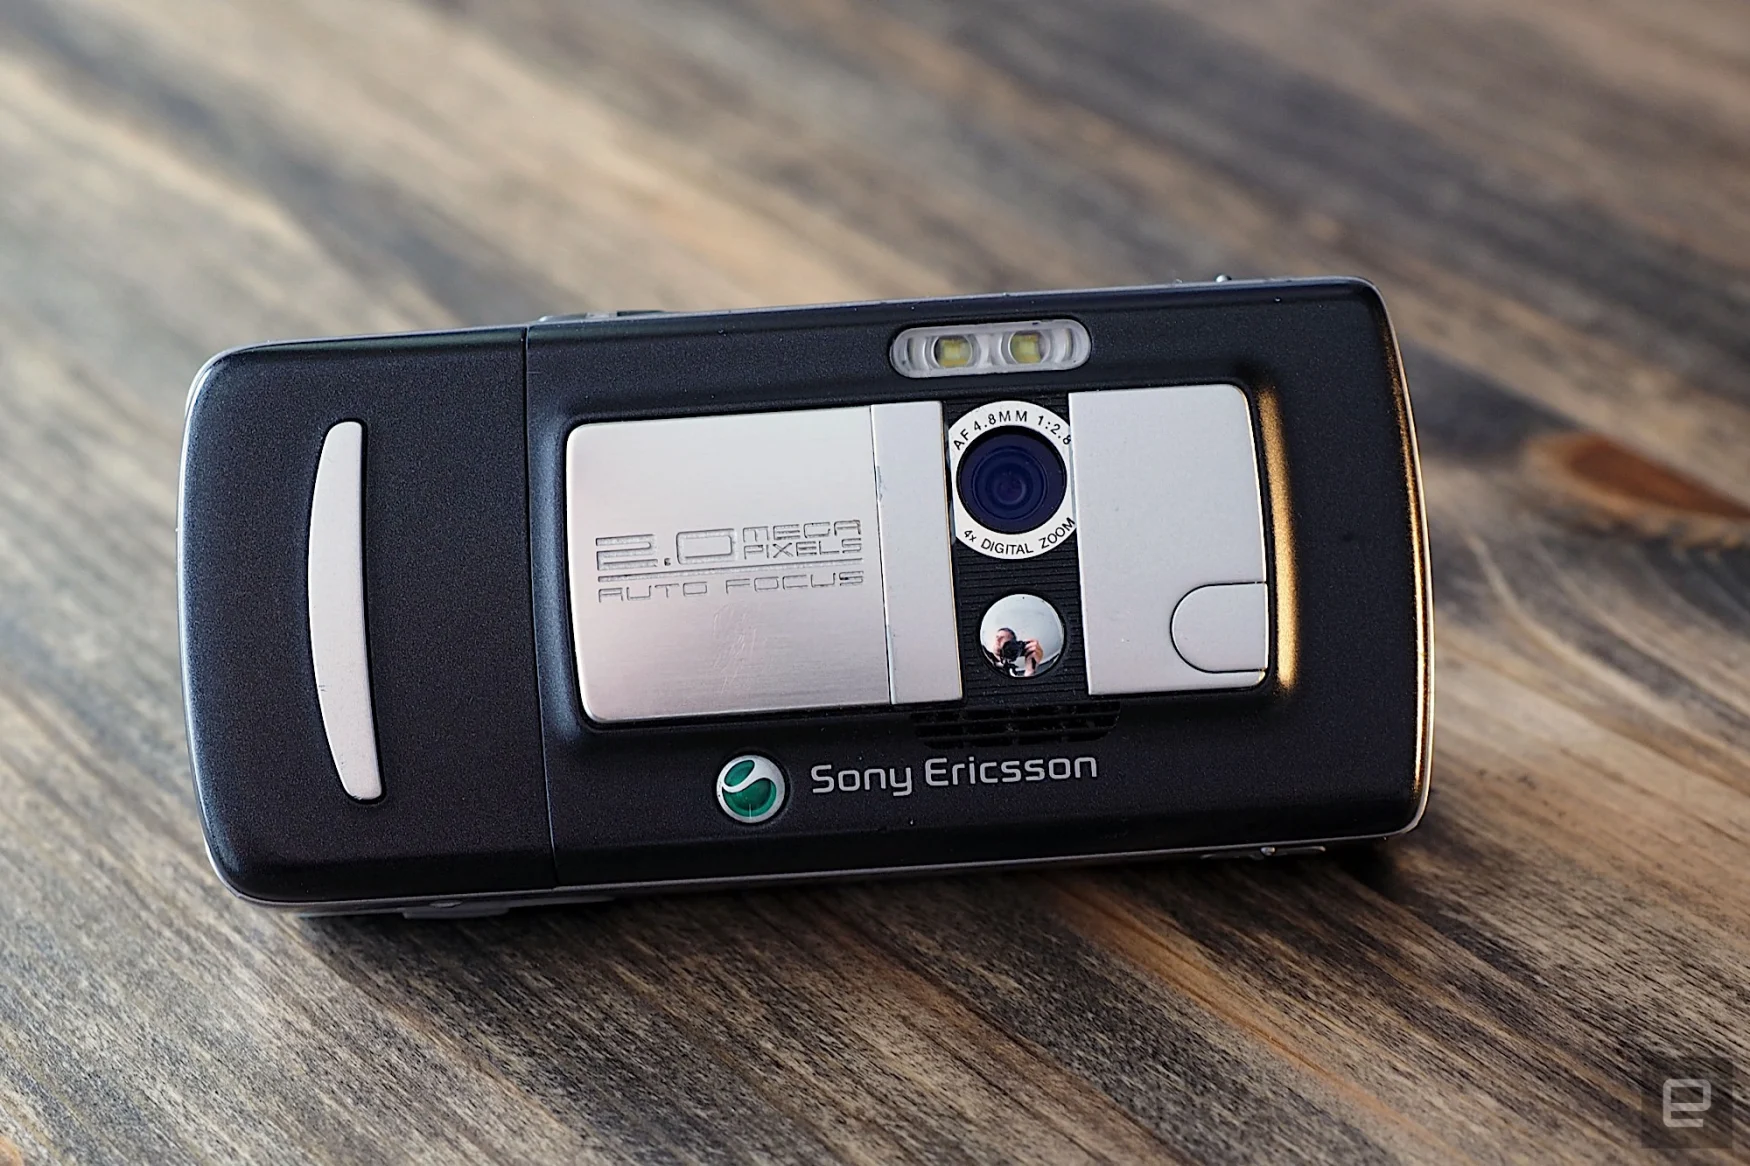 An utterly gorgeous image of the rear side of Sony Ericsson's K750i, a candybar phone from 2005 that had a slide-out camera. 